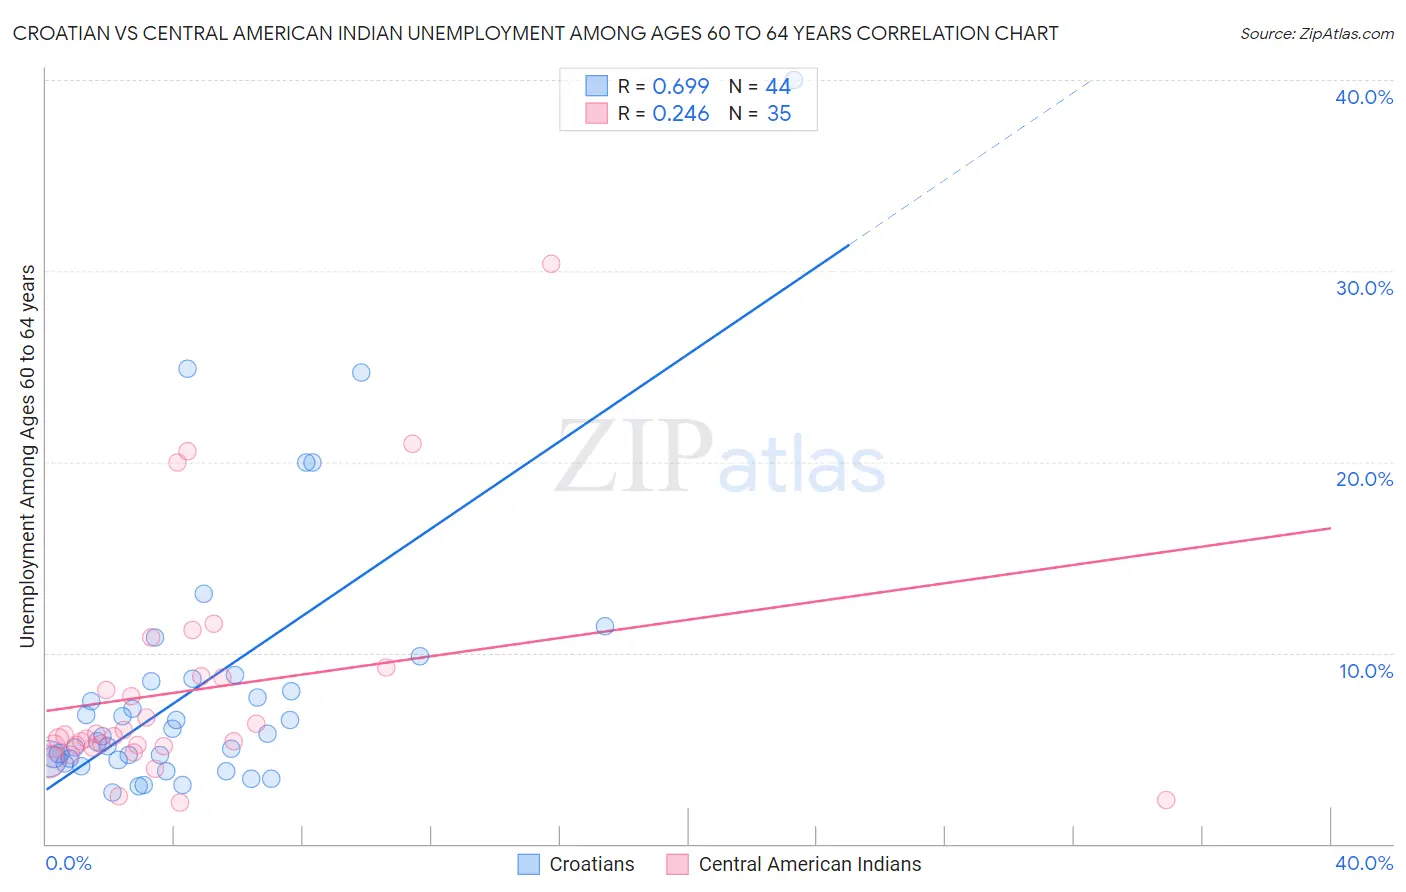 Croatian vs Central American Indian Unemployment Among Ages 60 to 64 years